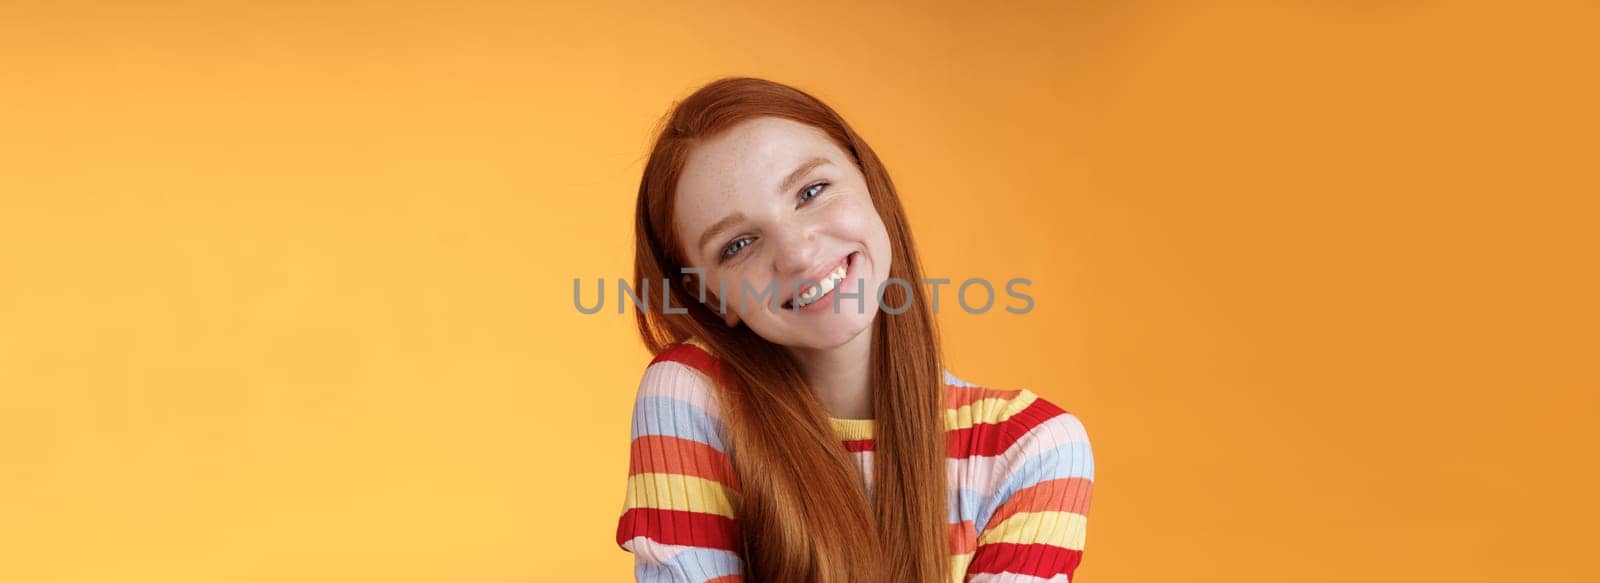 Lifestyle. Tender lively cheerful smiling redhead european girl 20s tilting head leaning shoulder flirting grinning cute make lovely gazes camera coquettish talking boyfriend standing silly orange background.